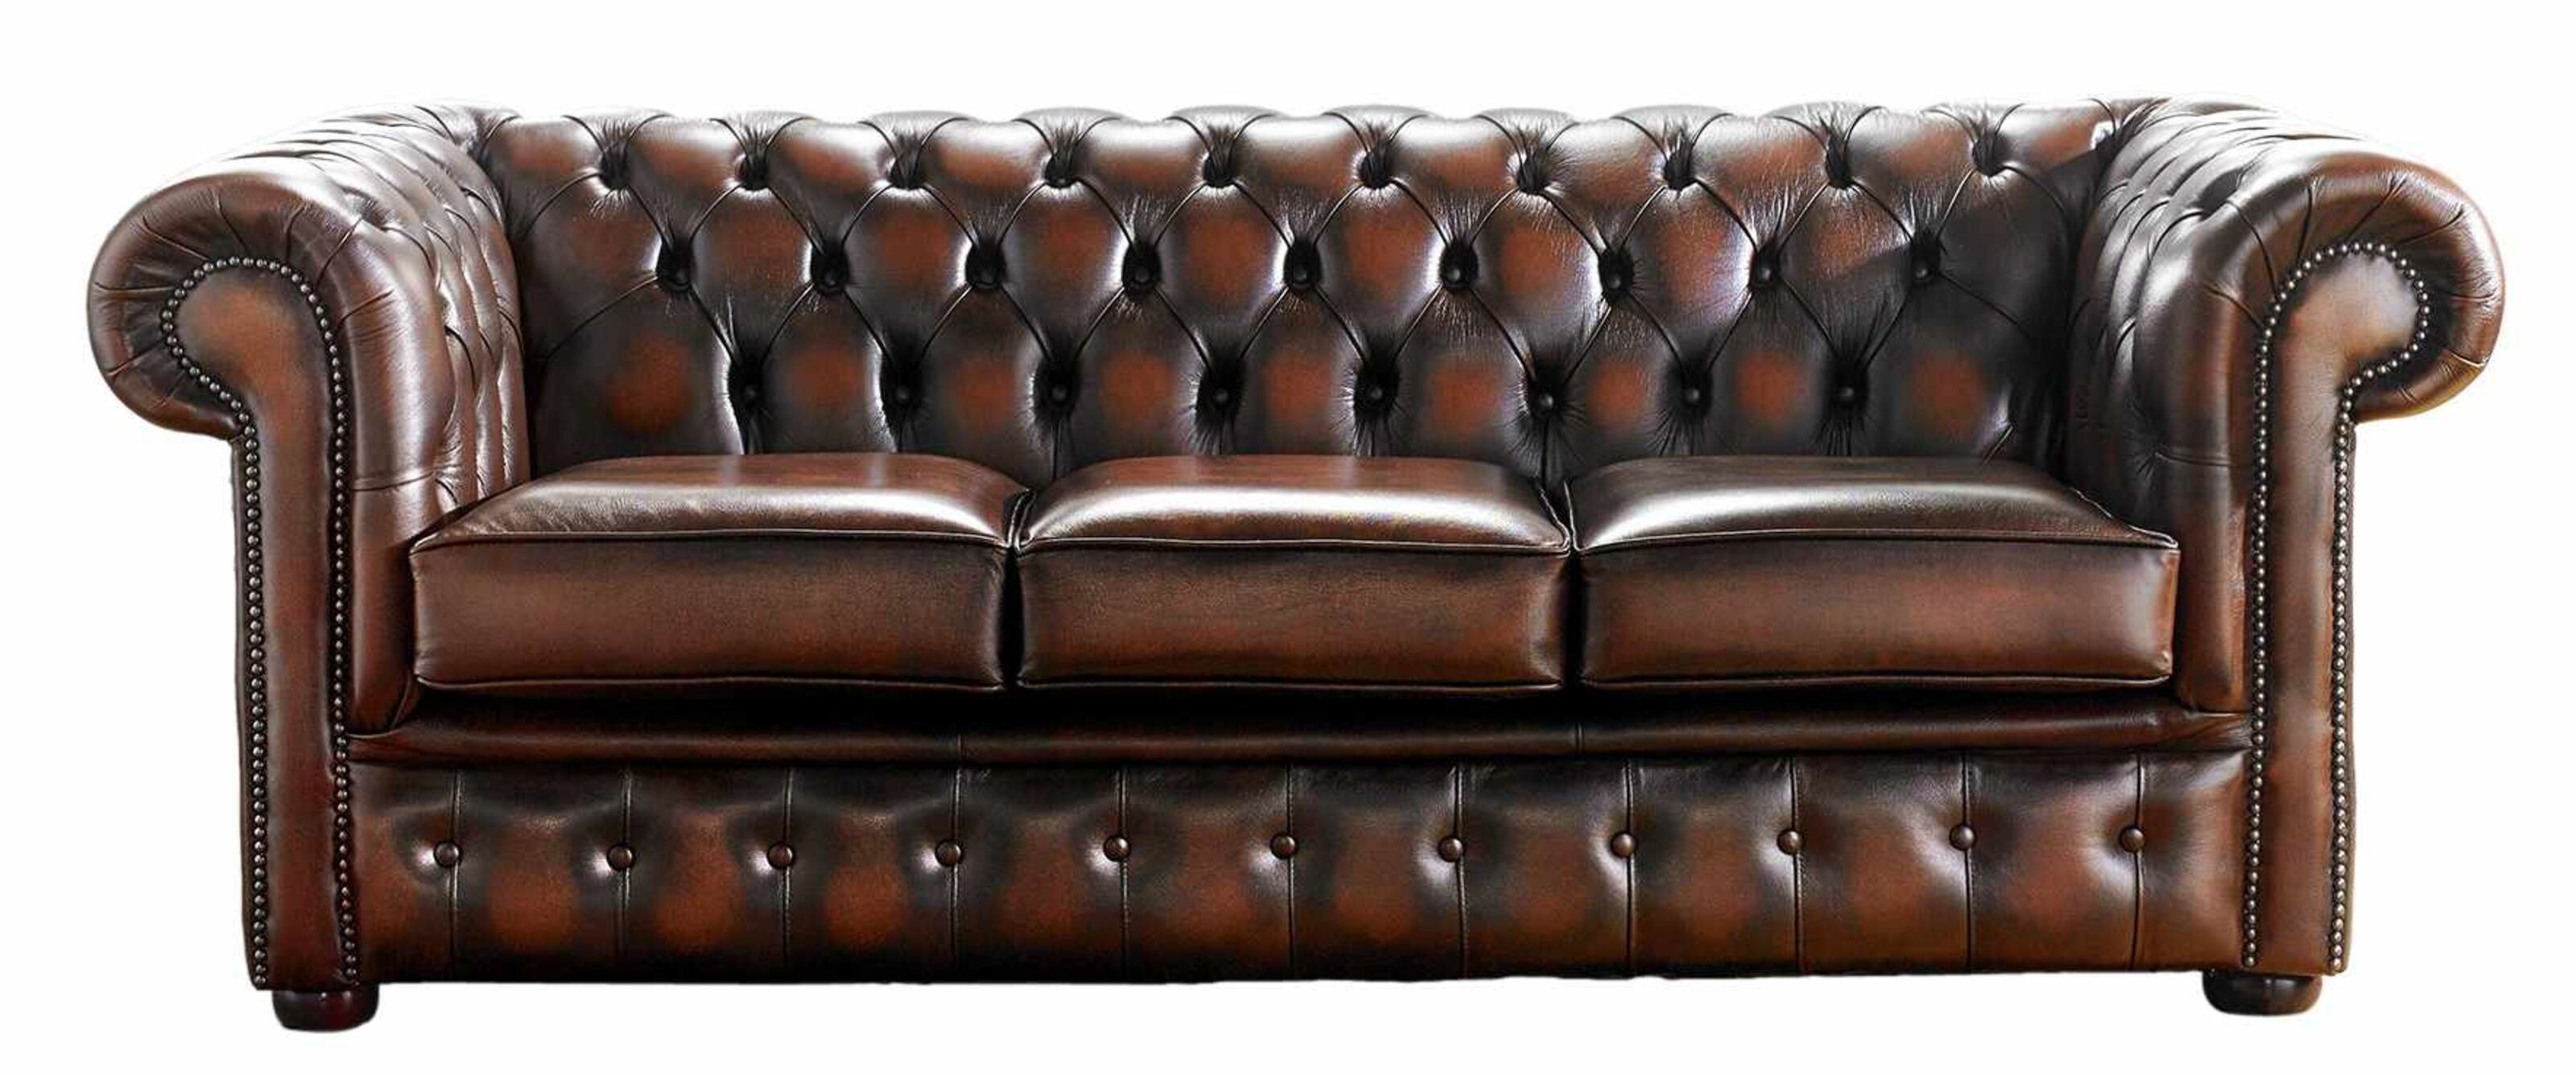 Deciphering the Price Tag Understanding the Luxury of Chesterfield Sofas  %Post Title